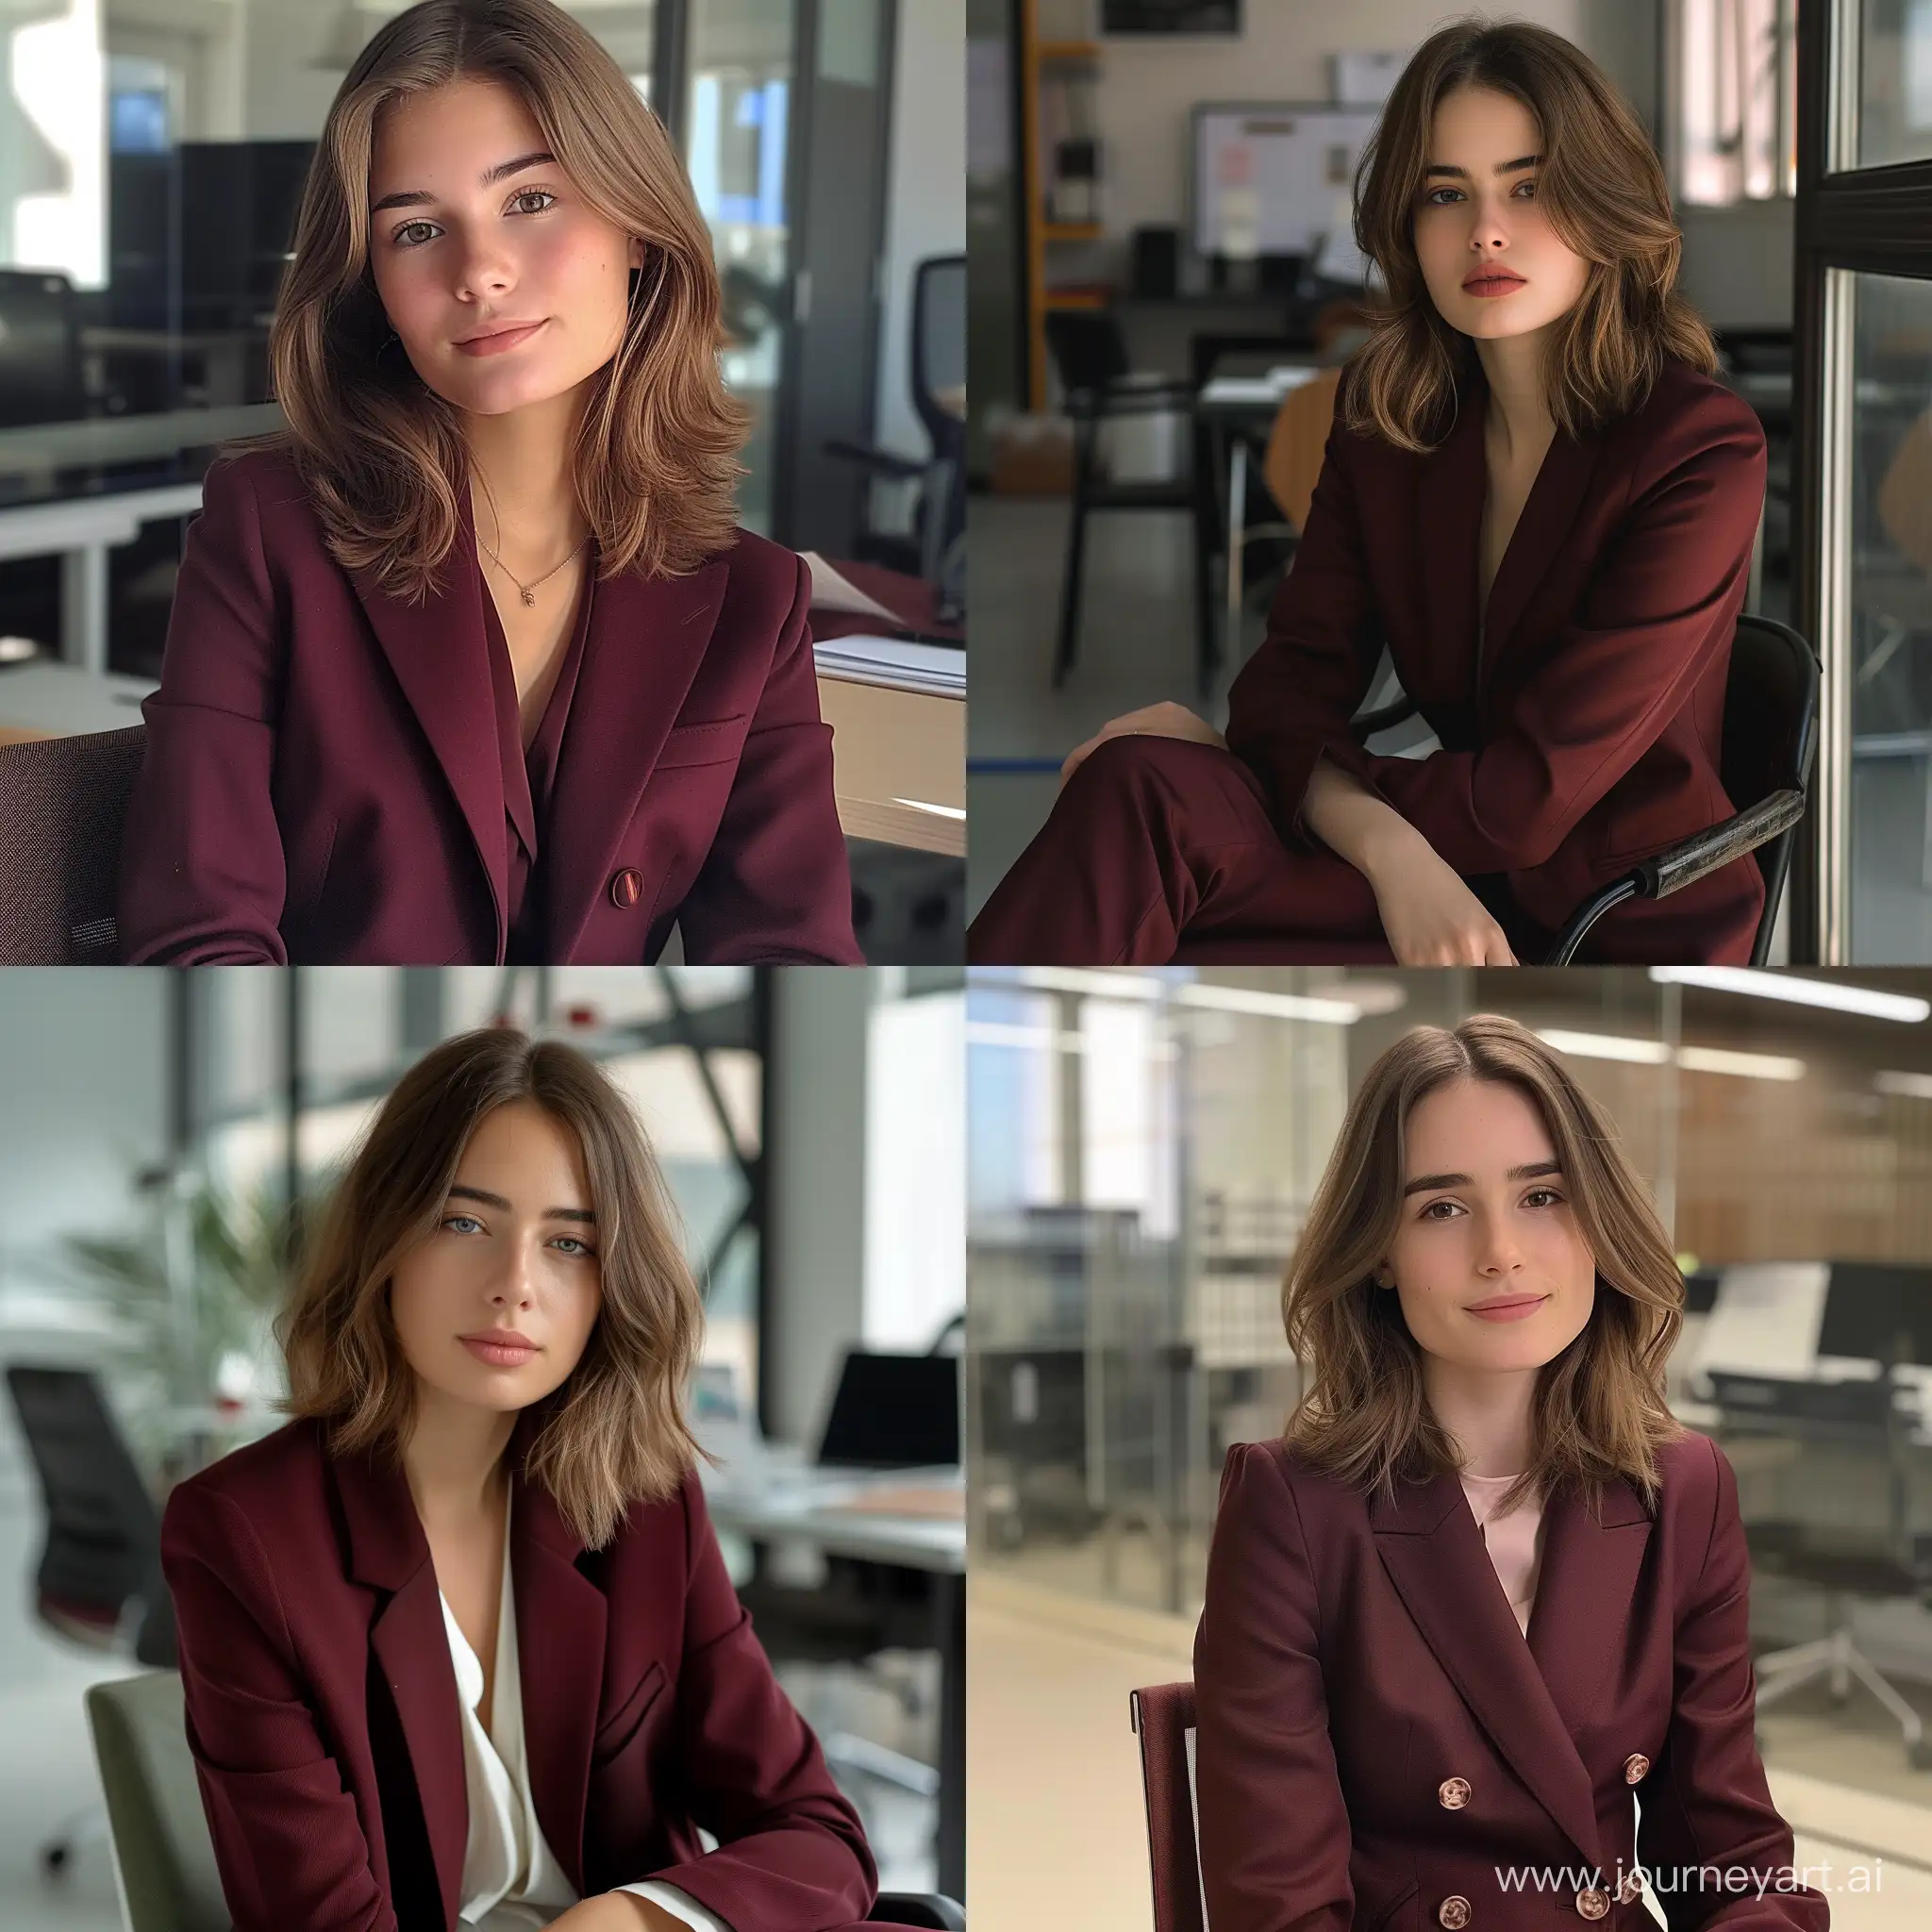 Professional-Woman-with-MediumLength-Brown-Hair-in-Burgundy-Blazer-Office-Portrait